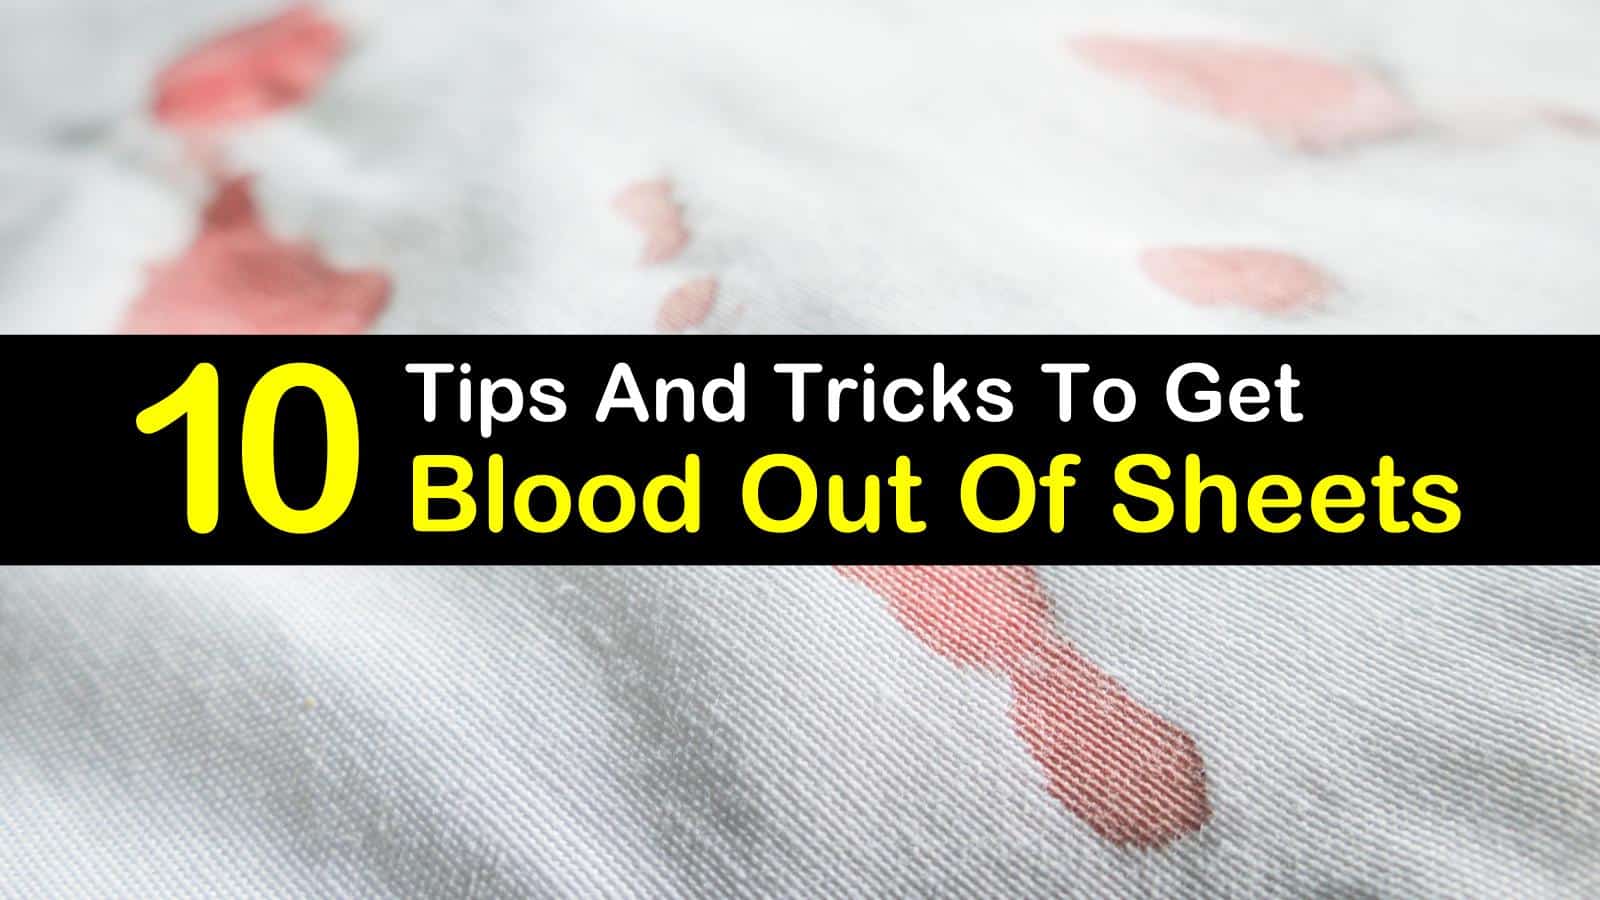 how to get blood out of sheets titleimg1